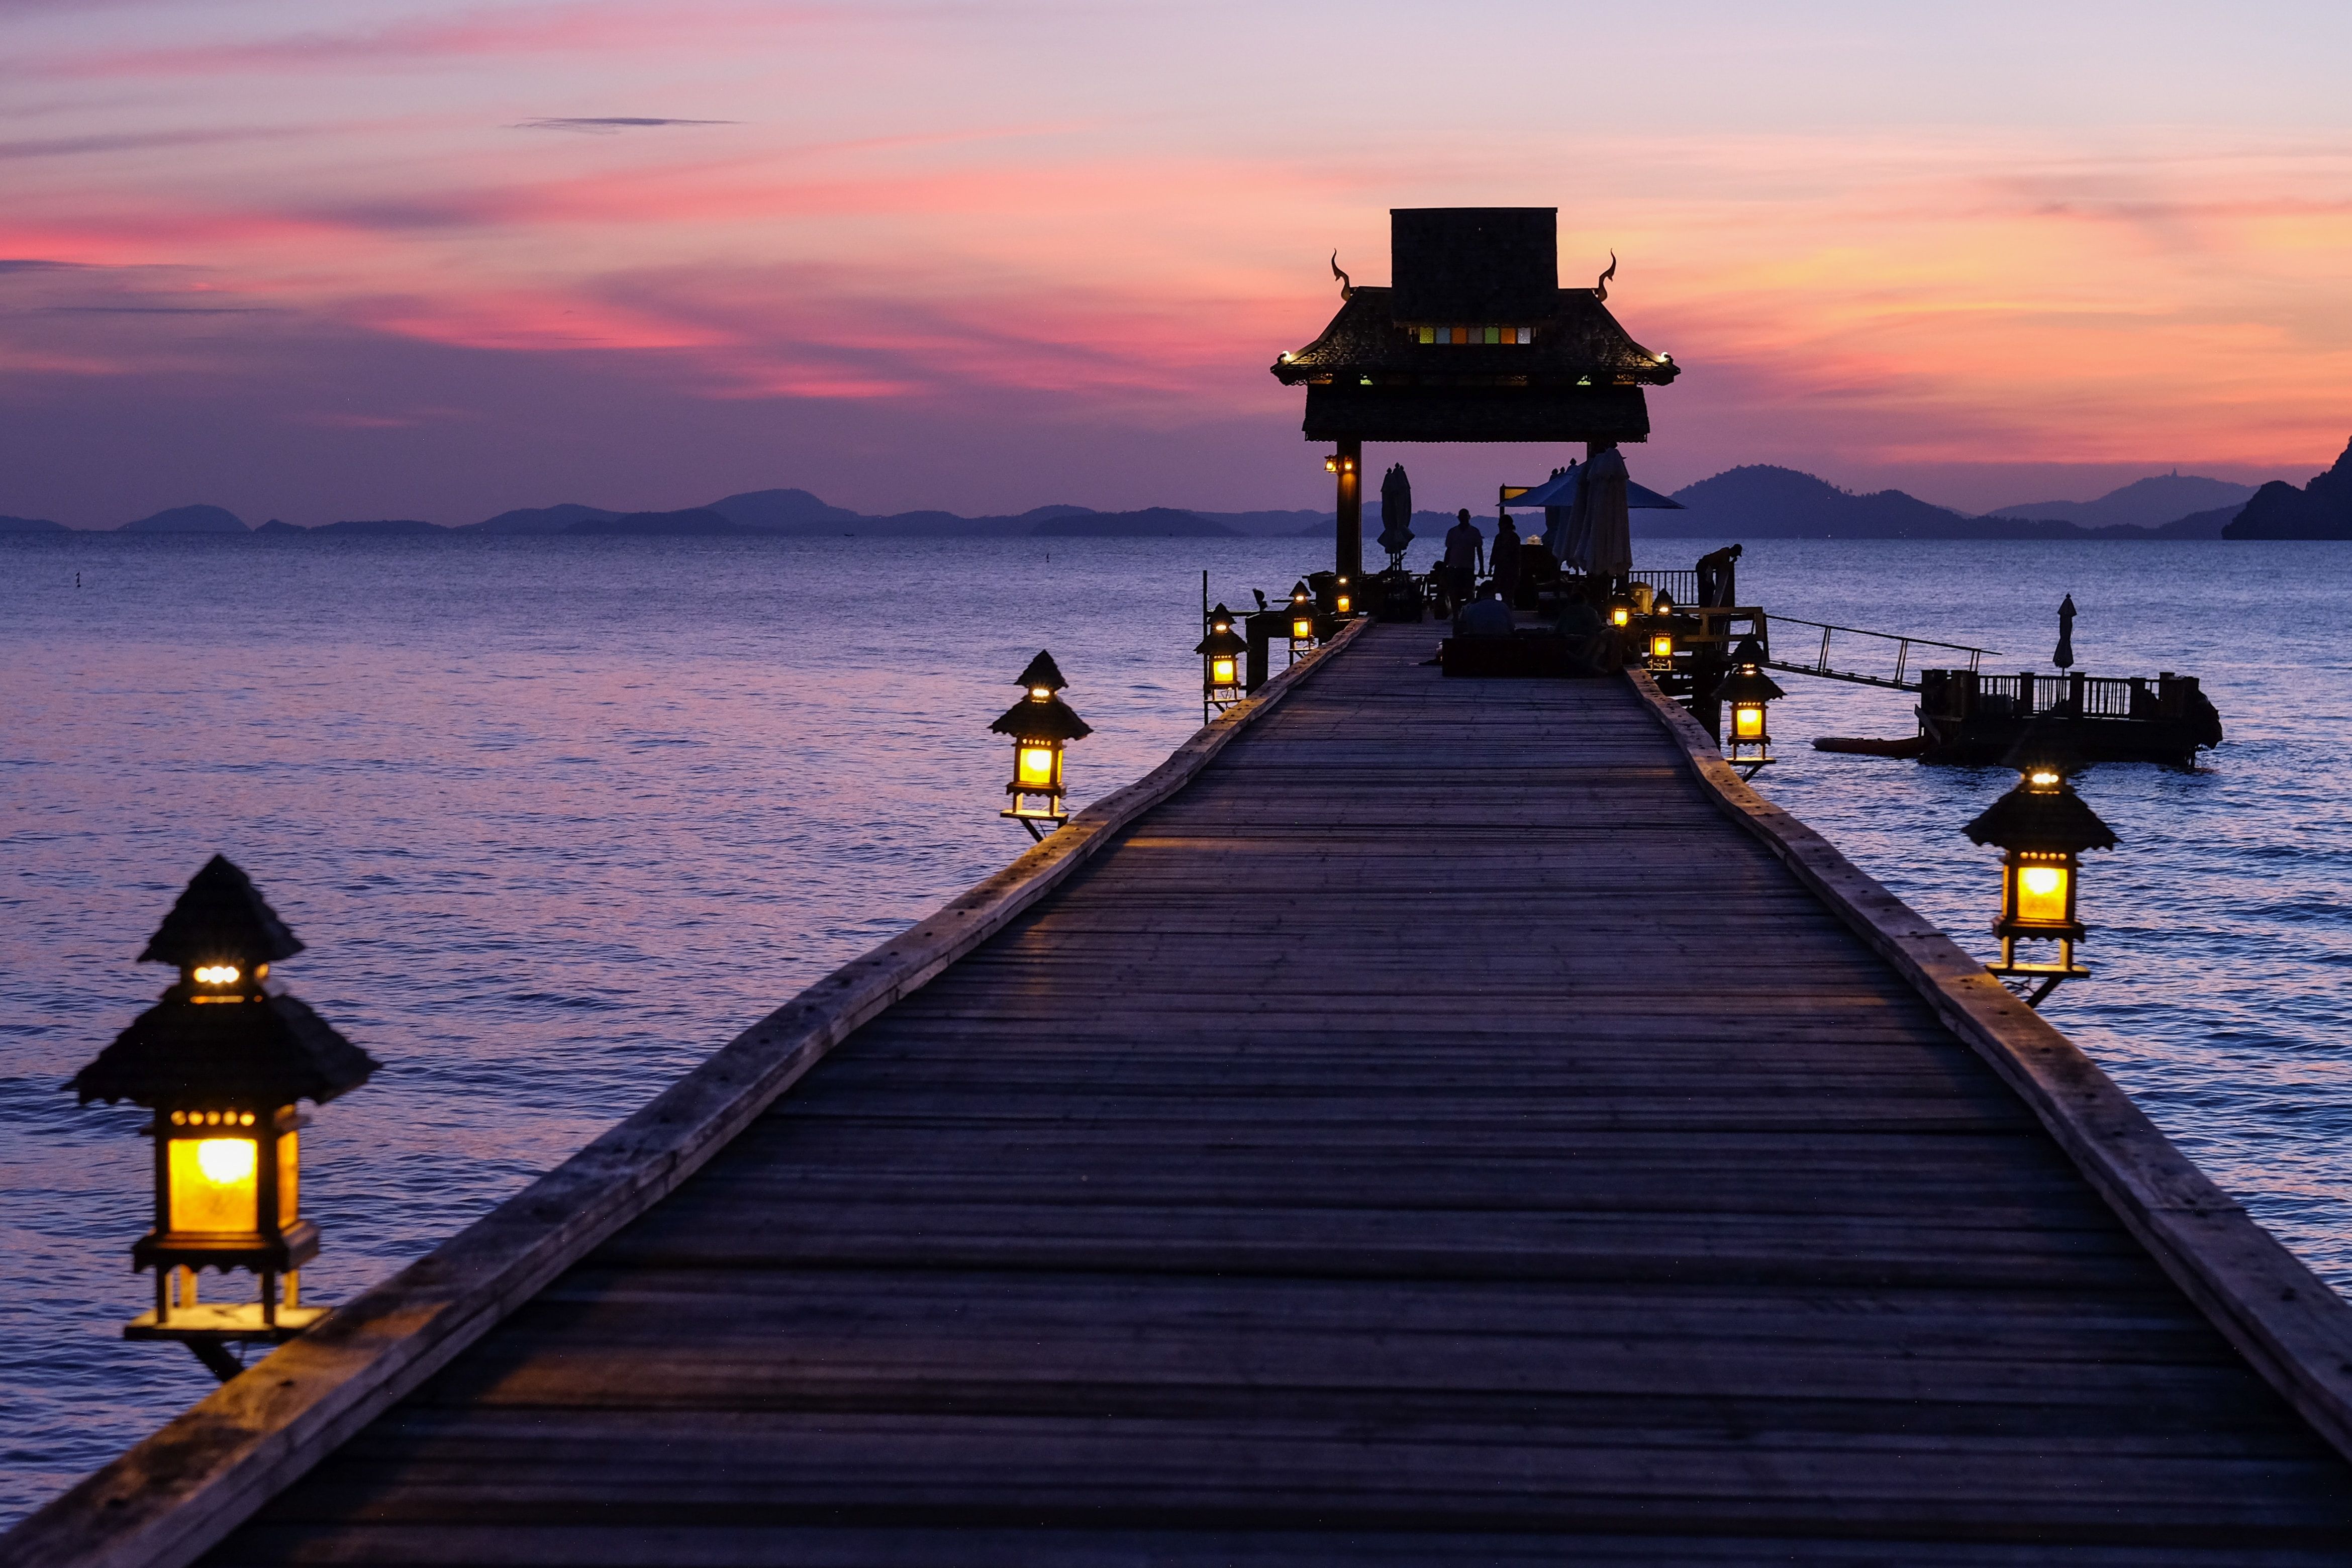 Koh Yao Yai Pier At Night Is A Stunning Place For A Romantic Stroll